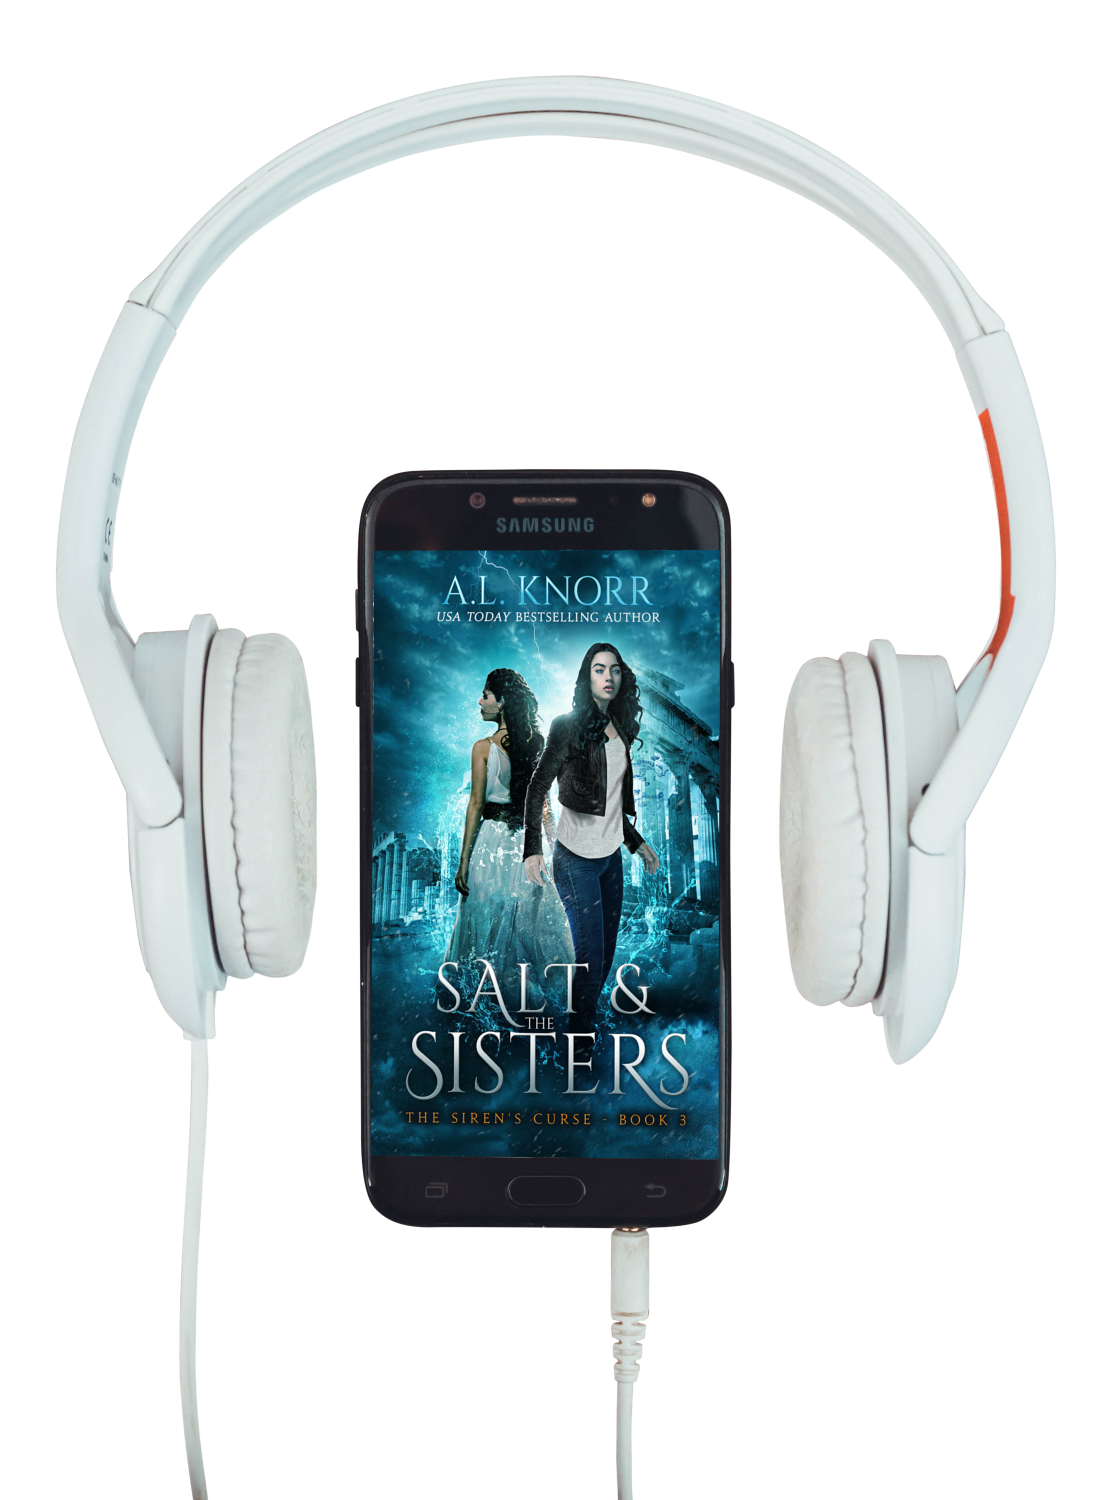 Salt & the Sisters audiobook graphic with headphones